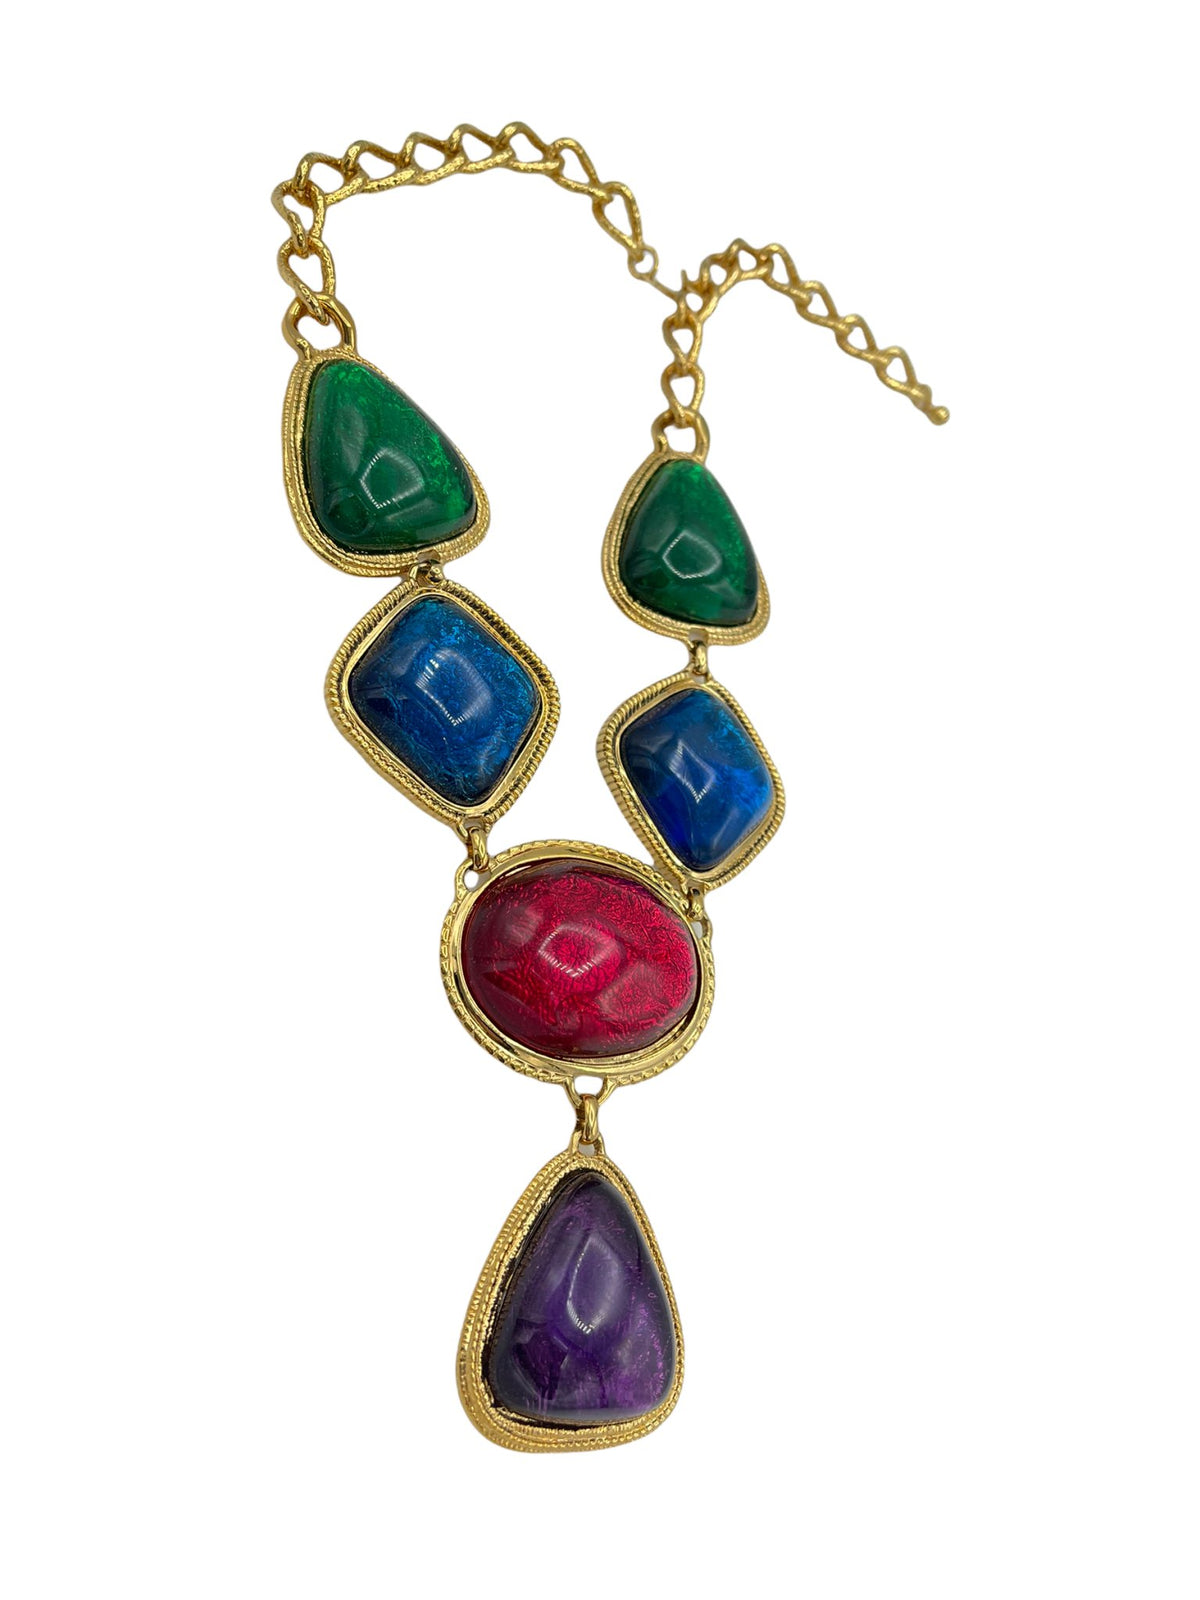 Kenneth Jay Lane Caprianti Jewel Color Gold Pendant - 24 Wishes Vintage Jewelry